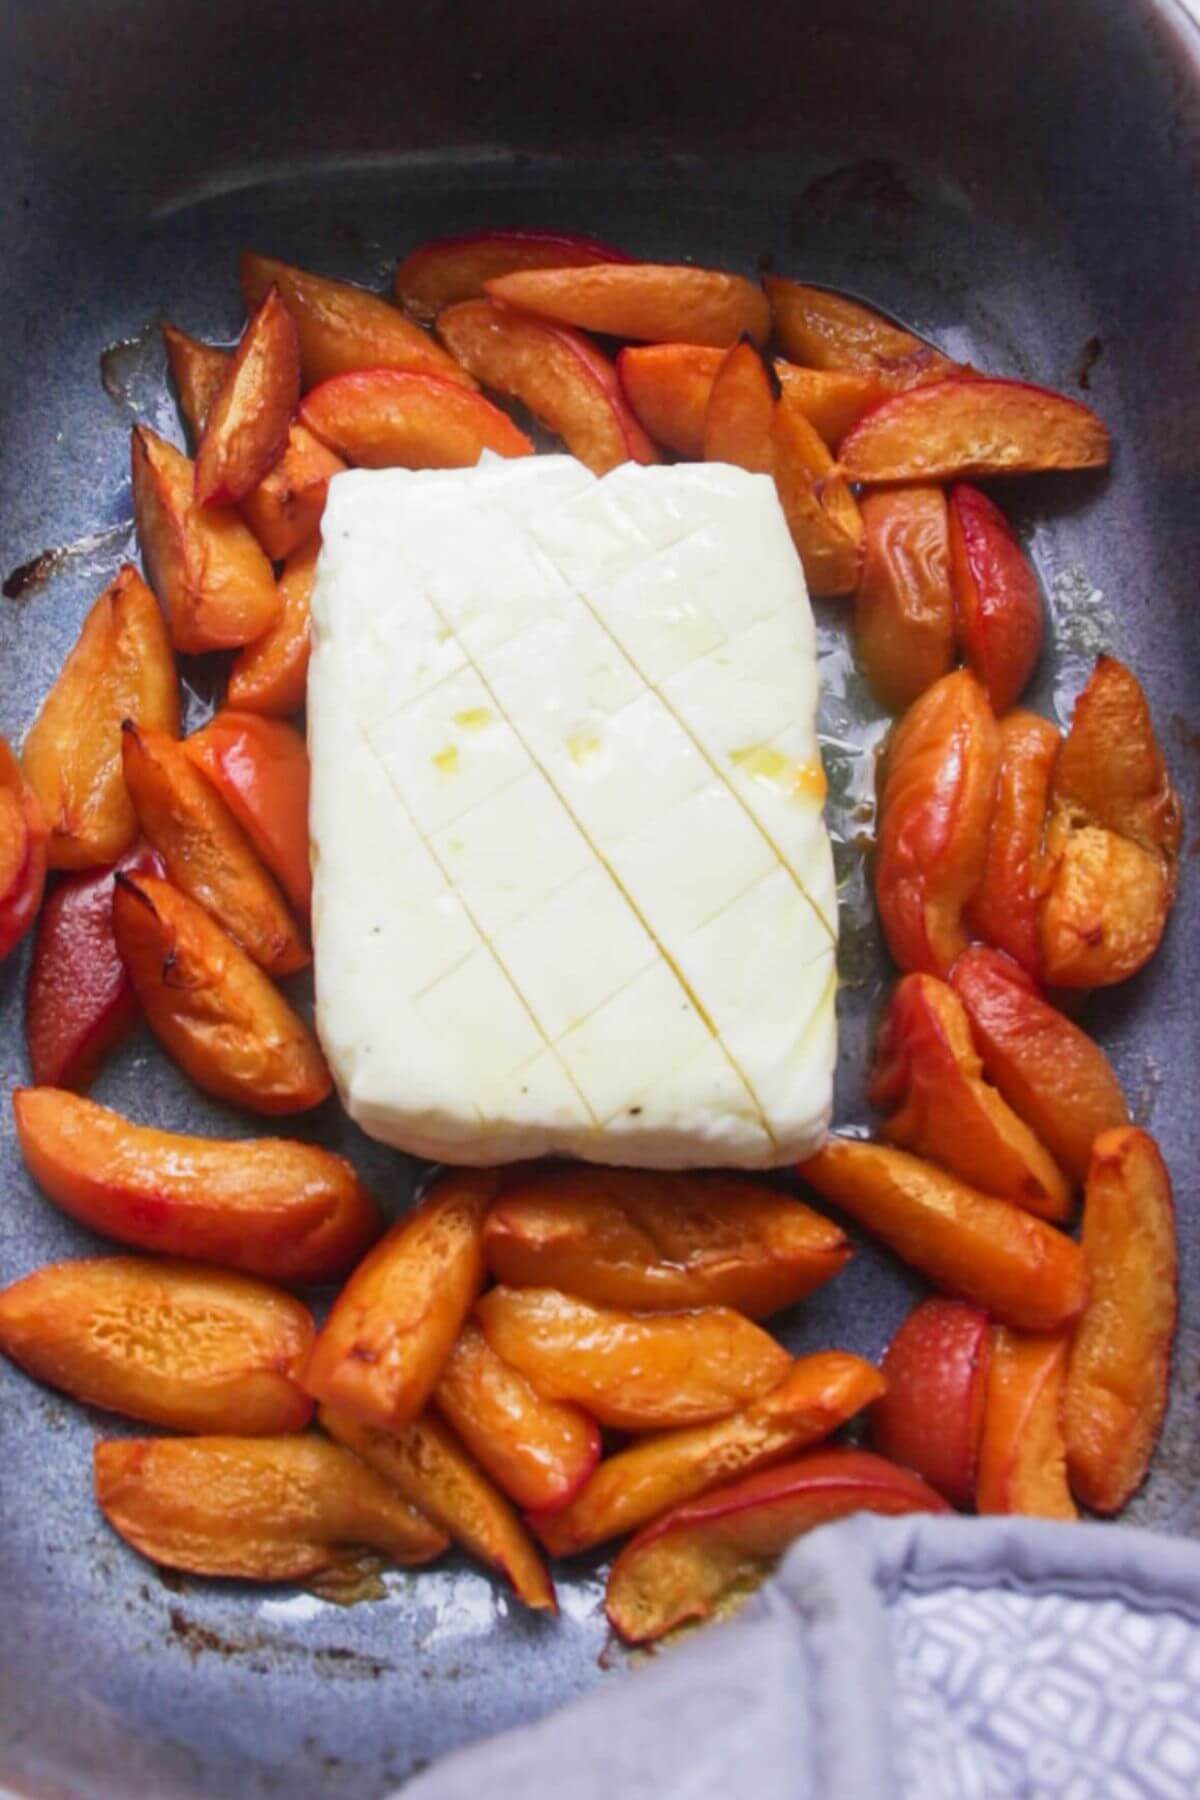 Criss cross cut whole halloumi in the middle of chopped apricots in a small blue oven dish.